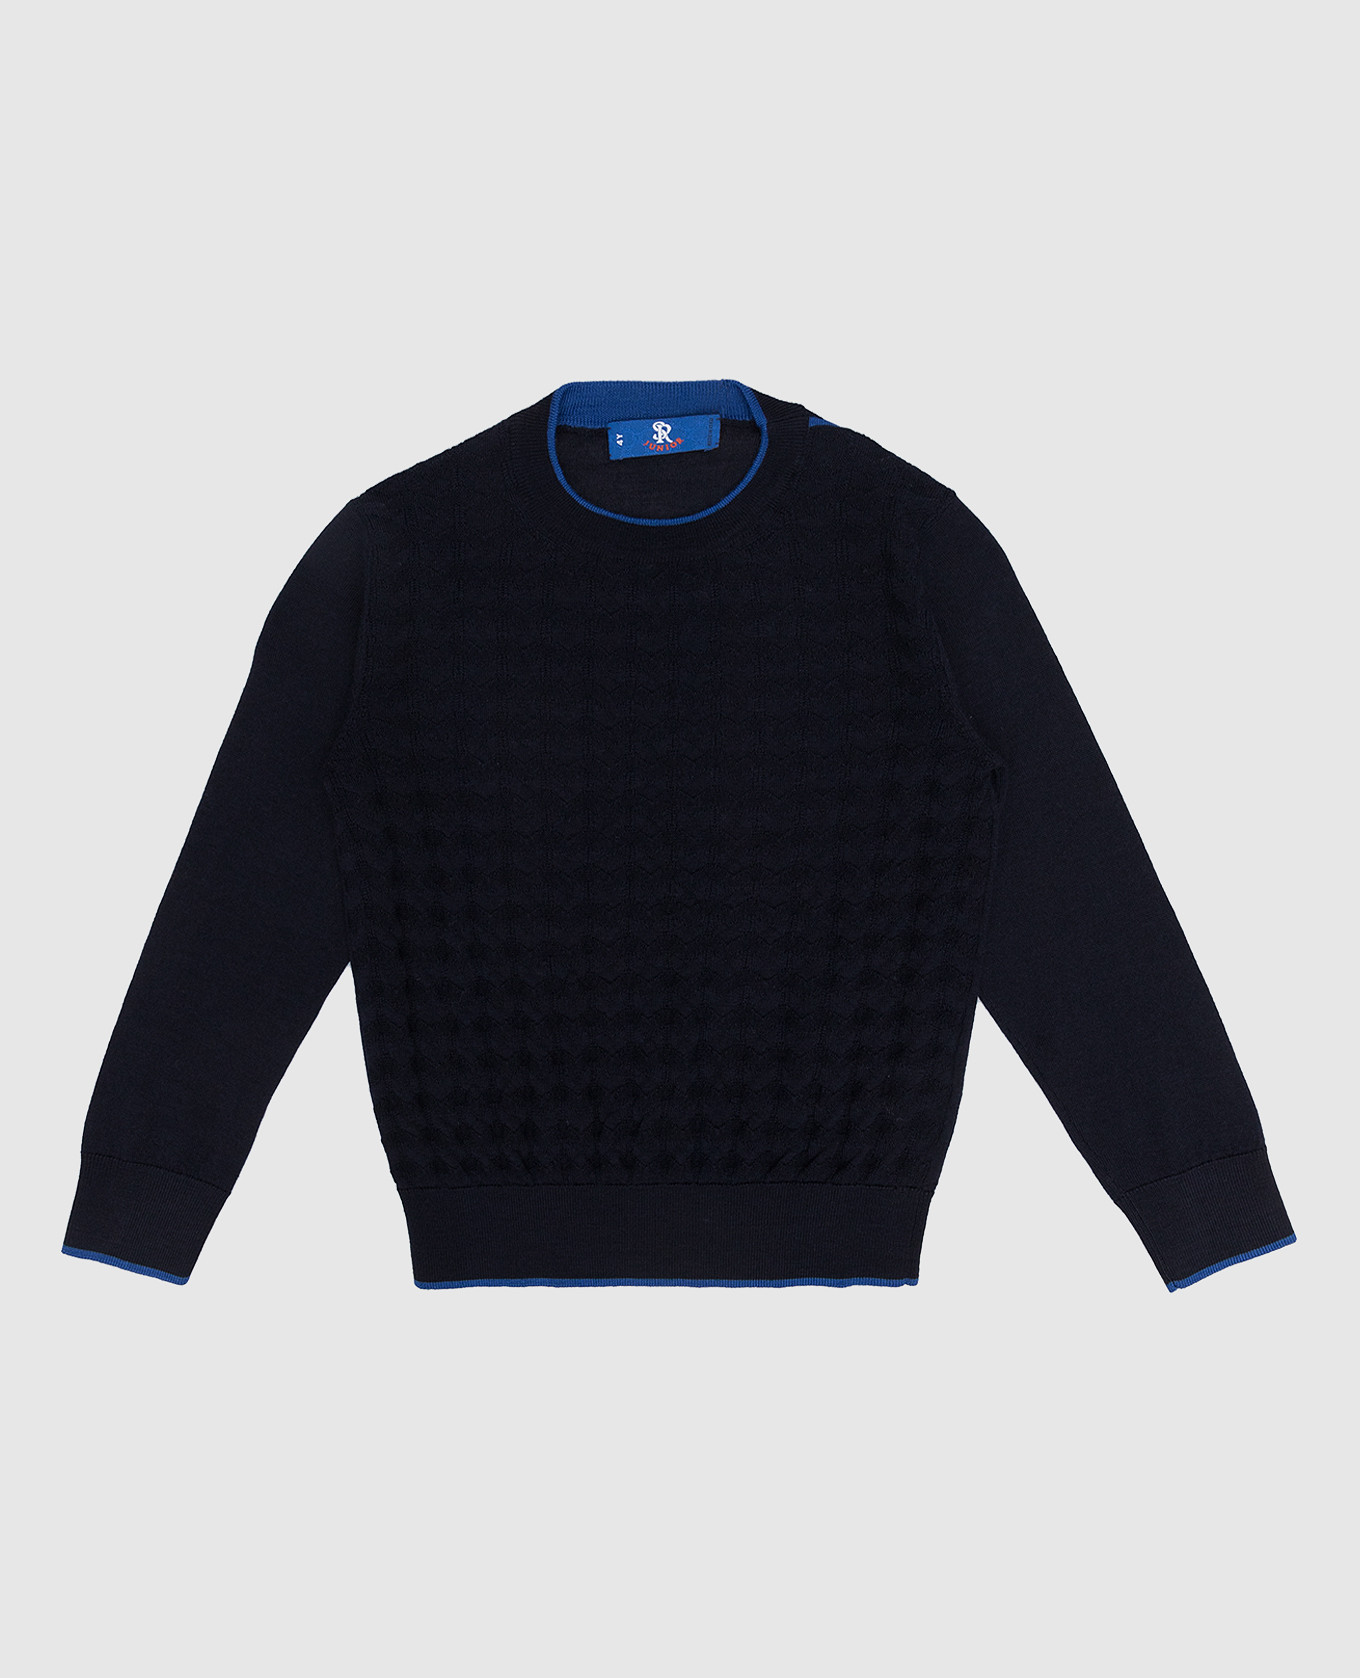 Children's blue jumper made of wool with a textured pattern